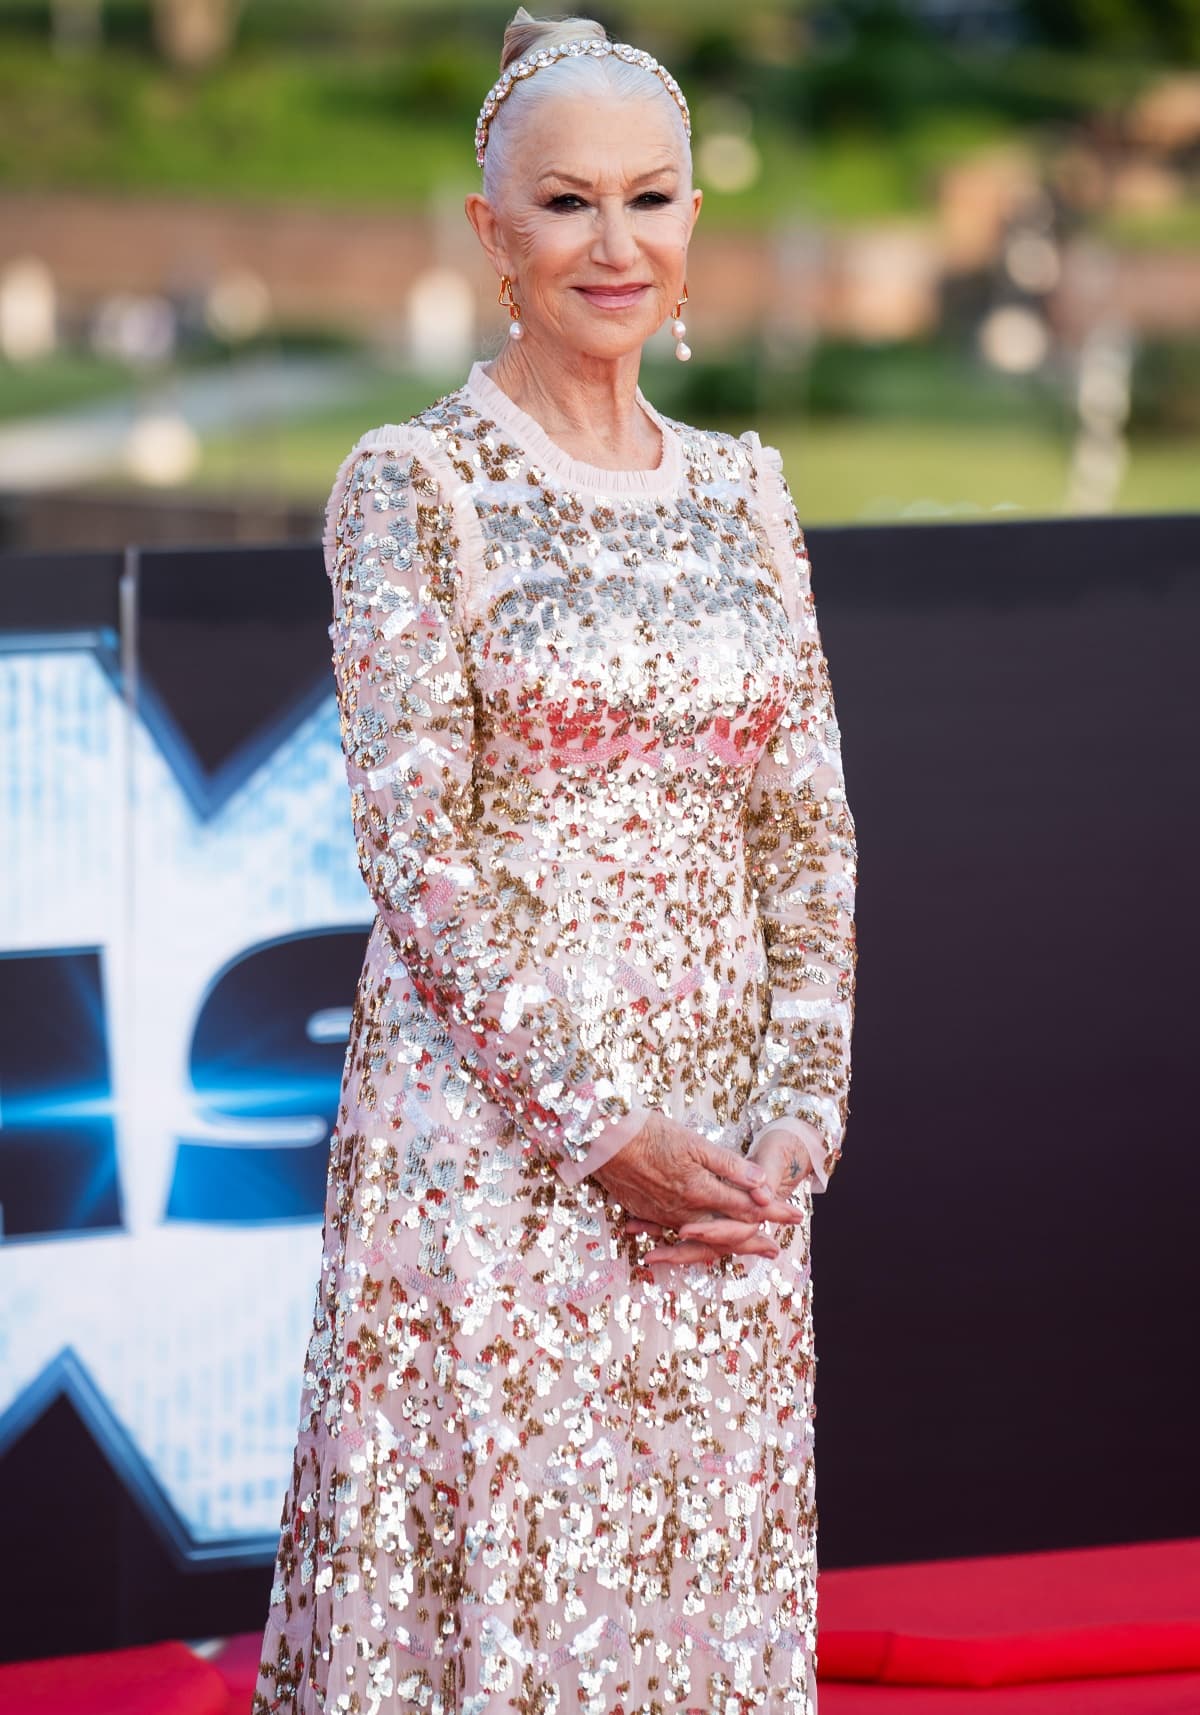 Helen Mirren looking every bit the regal queen that she is with an embellished gown, a flawless beauty look, and a flashy silver tiara